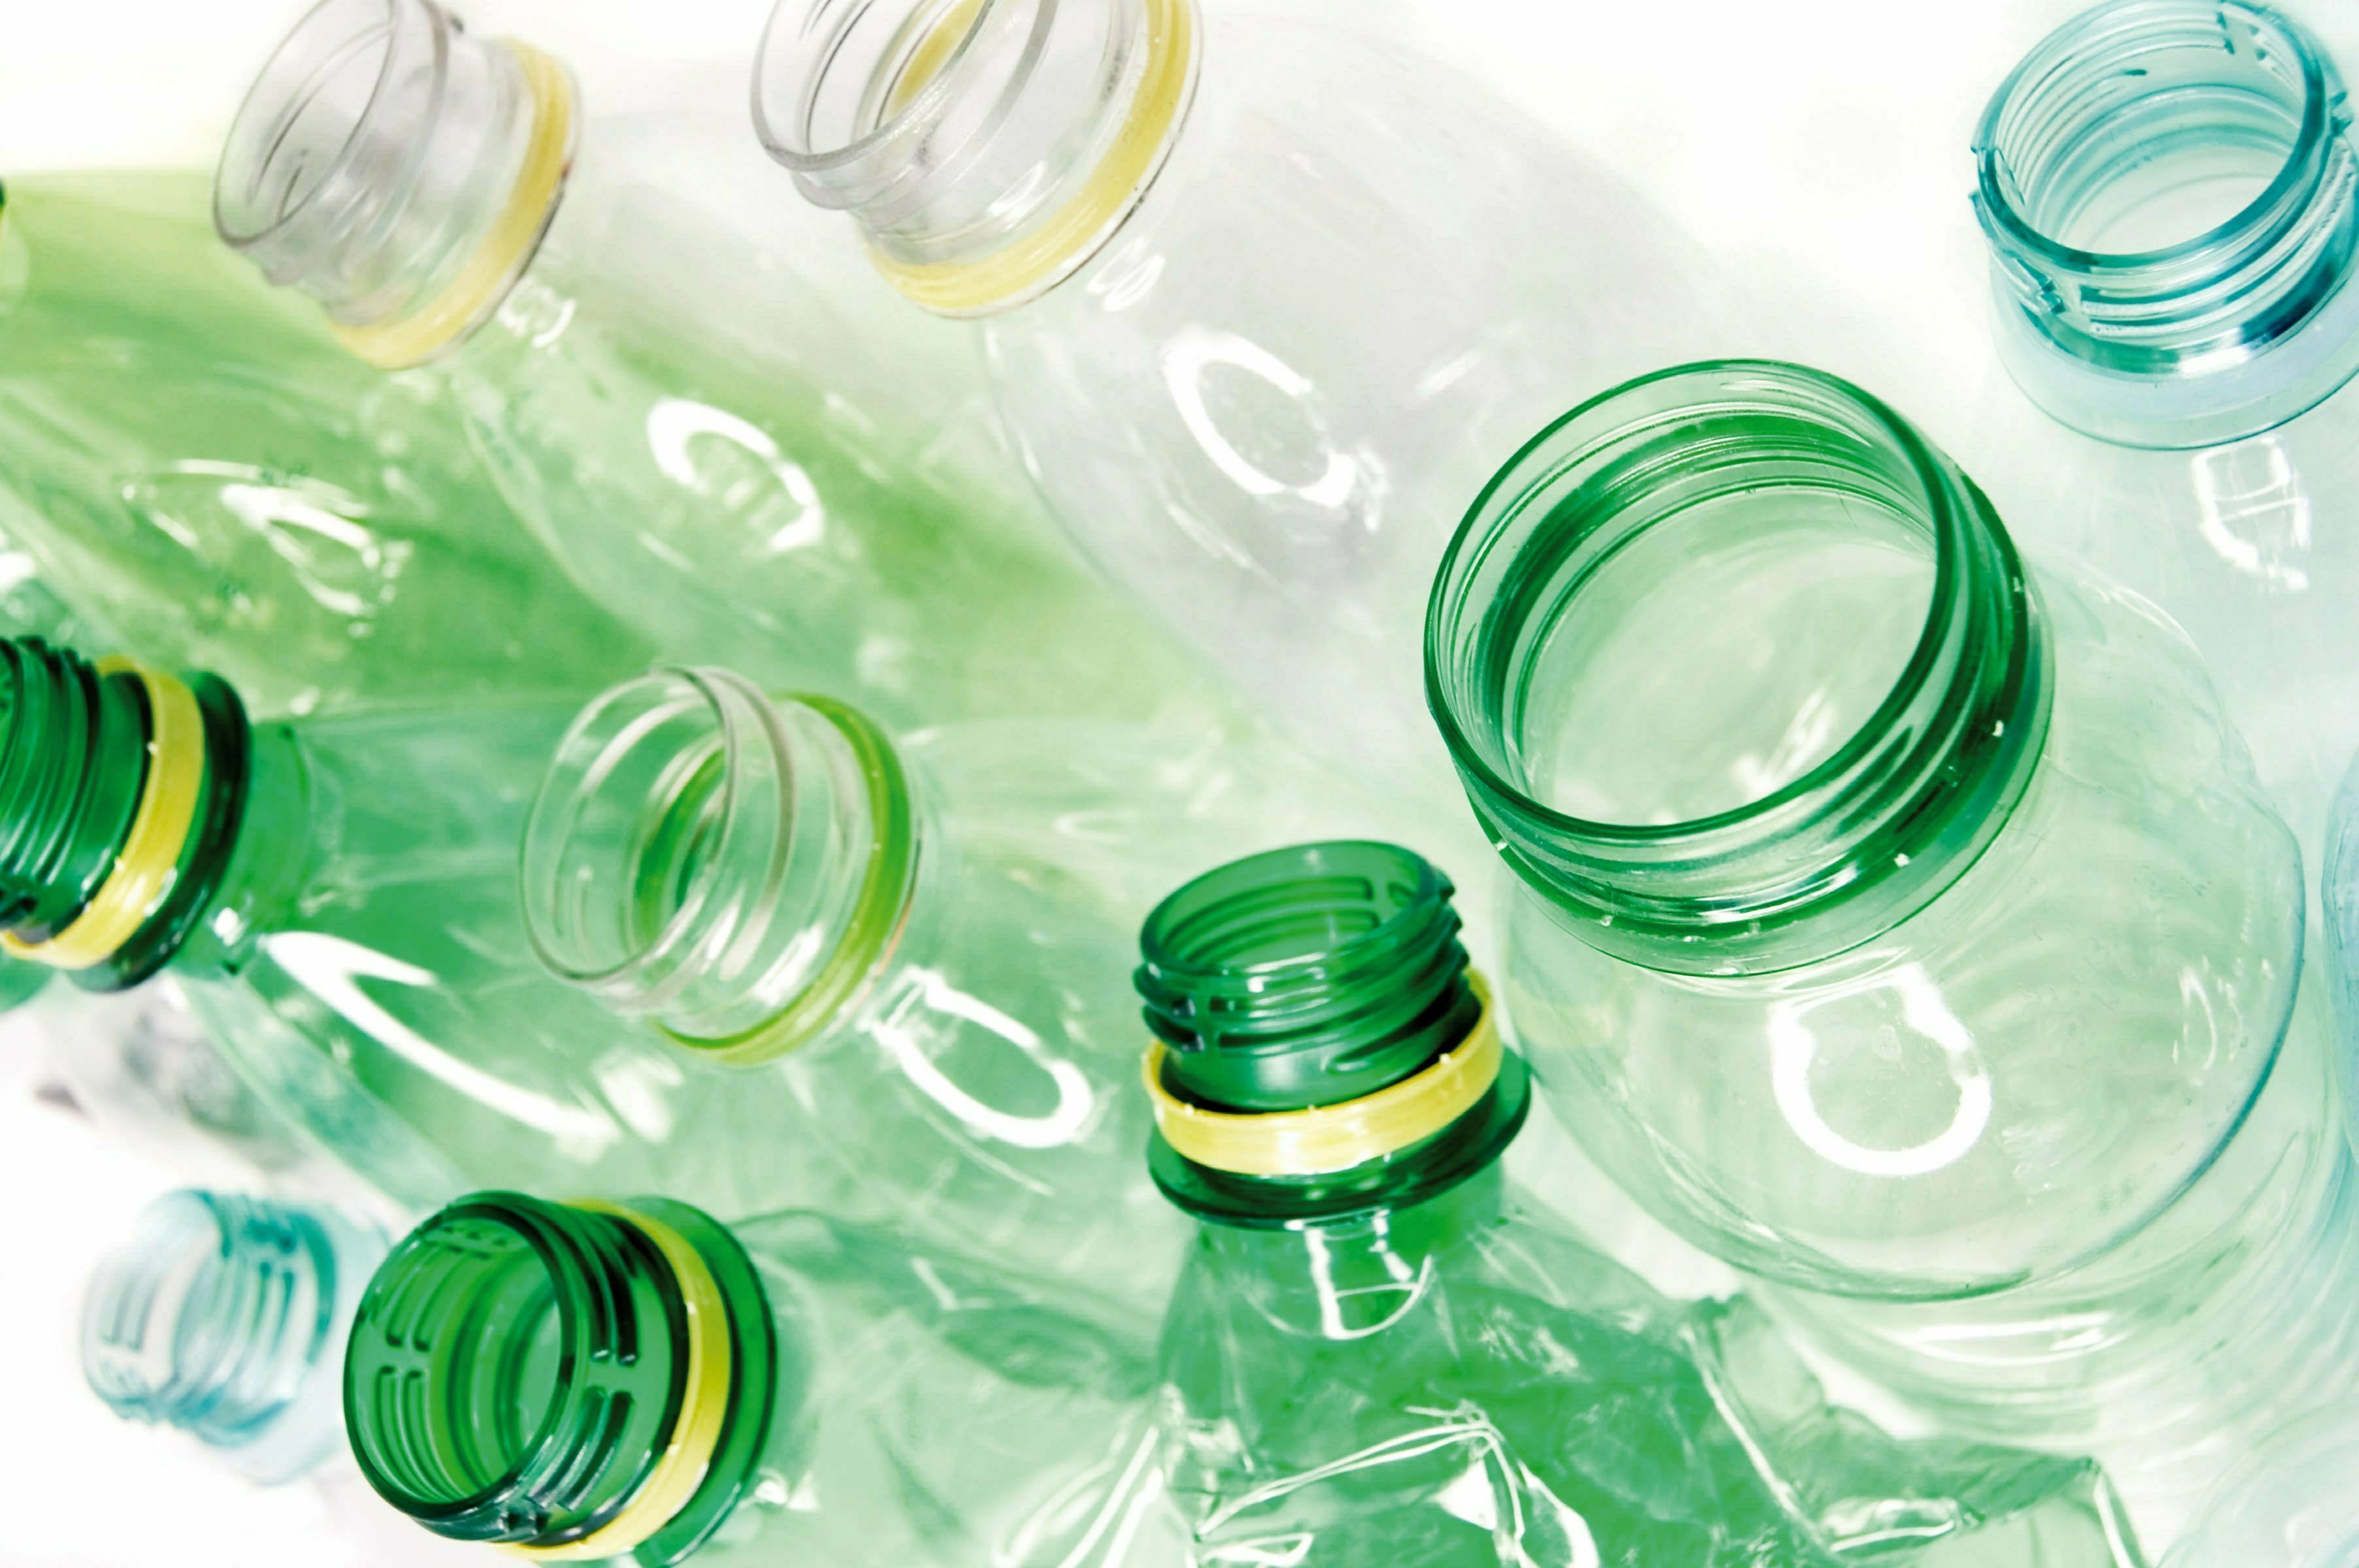 Benefits of using recycled plastics in food packaging